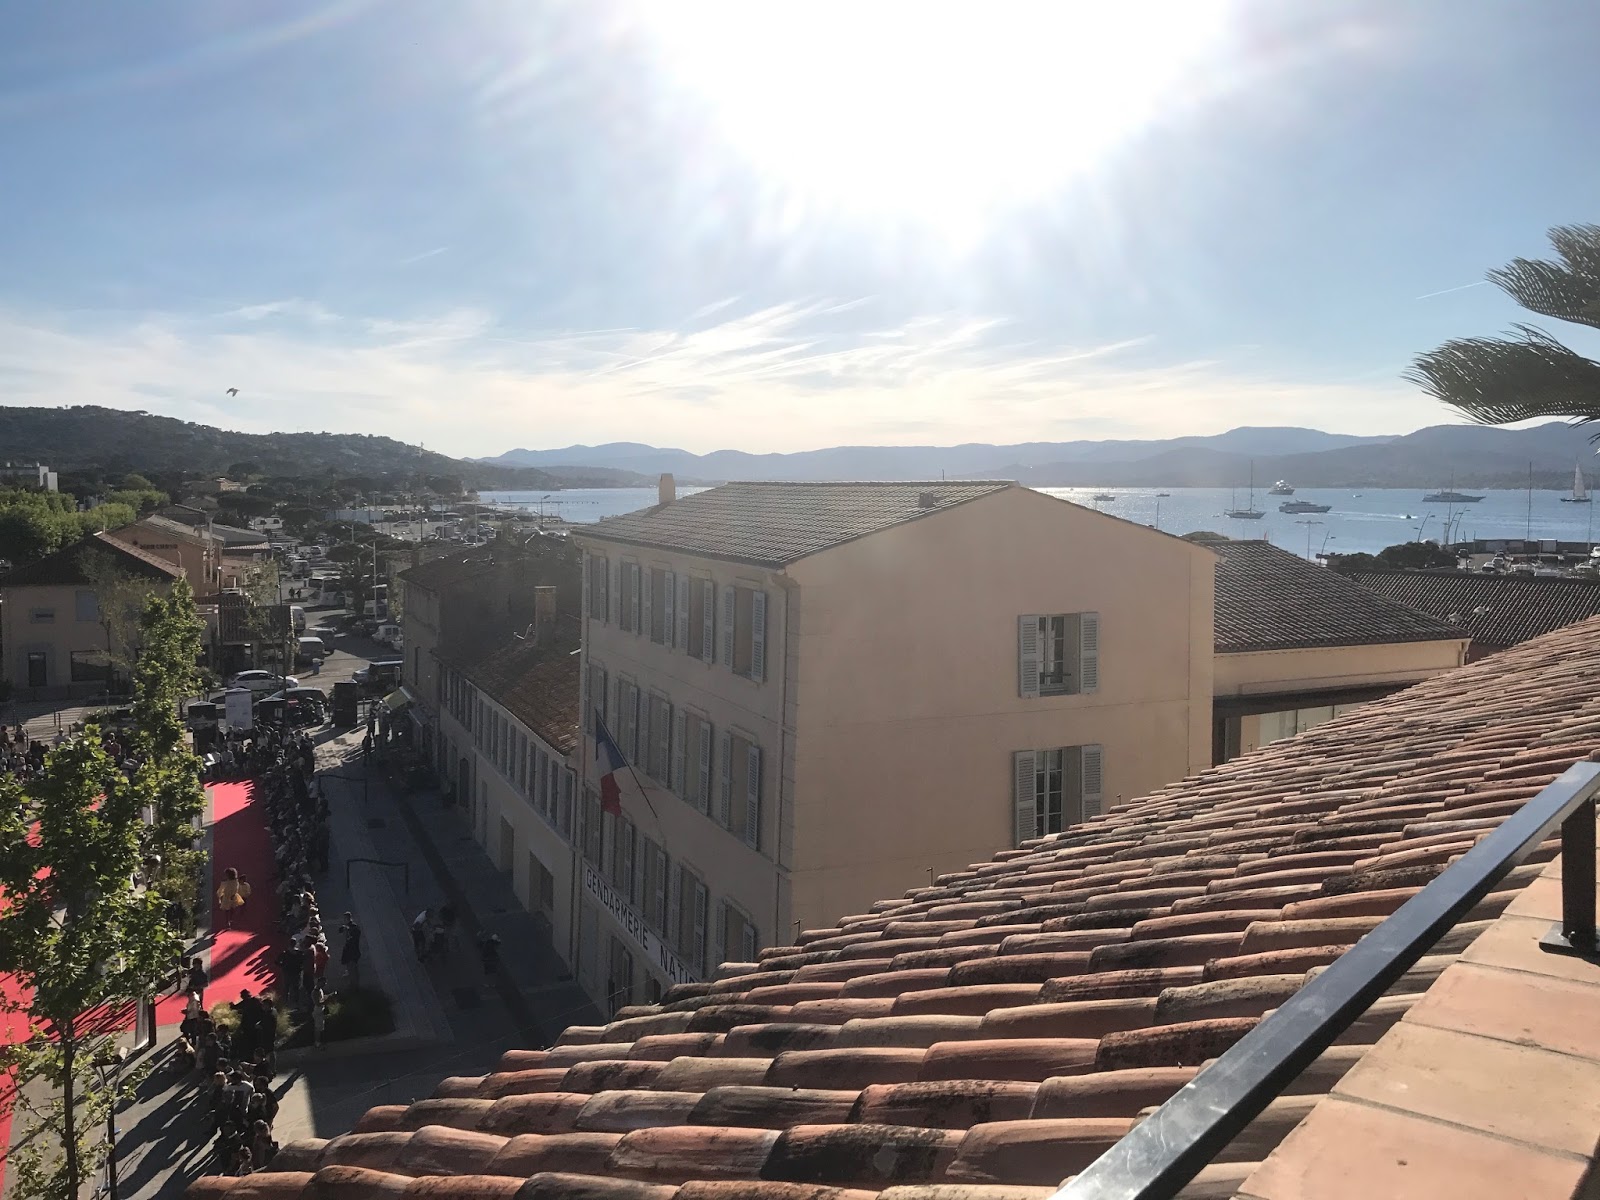 Melaines-Insights : Welcome to Saint Tropez, my insights for you!